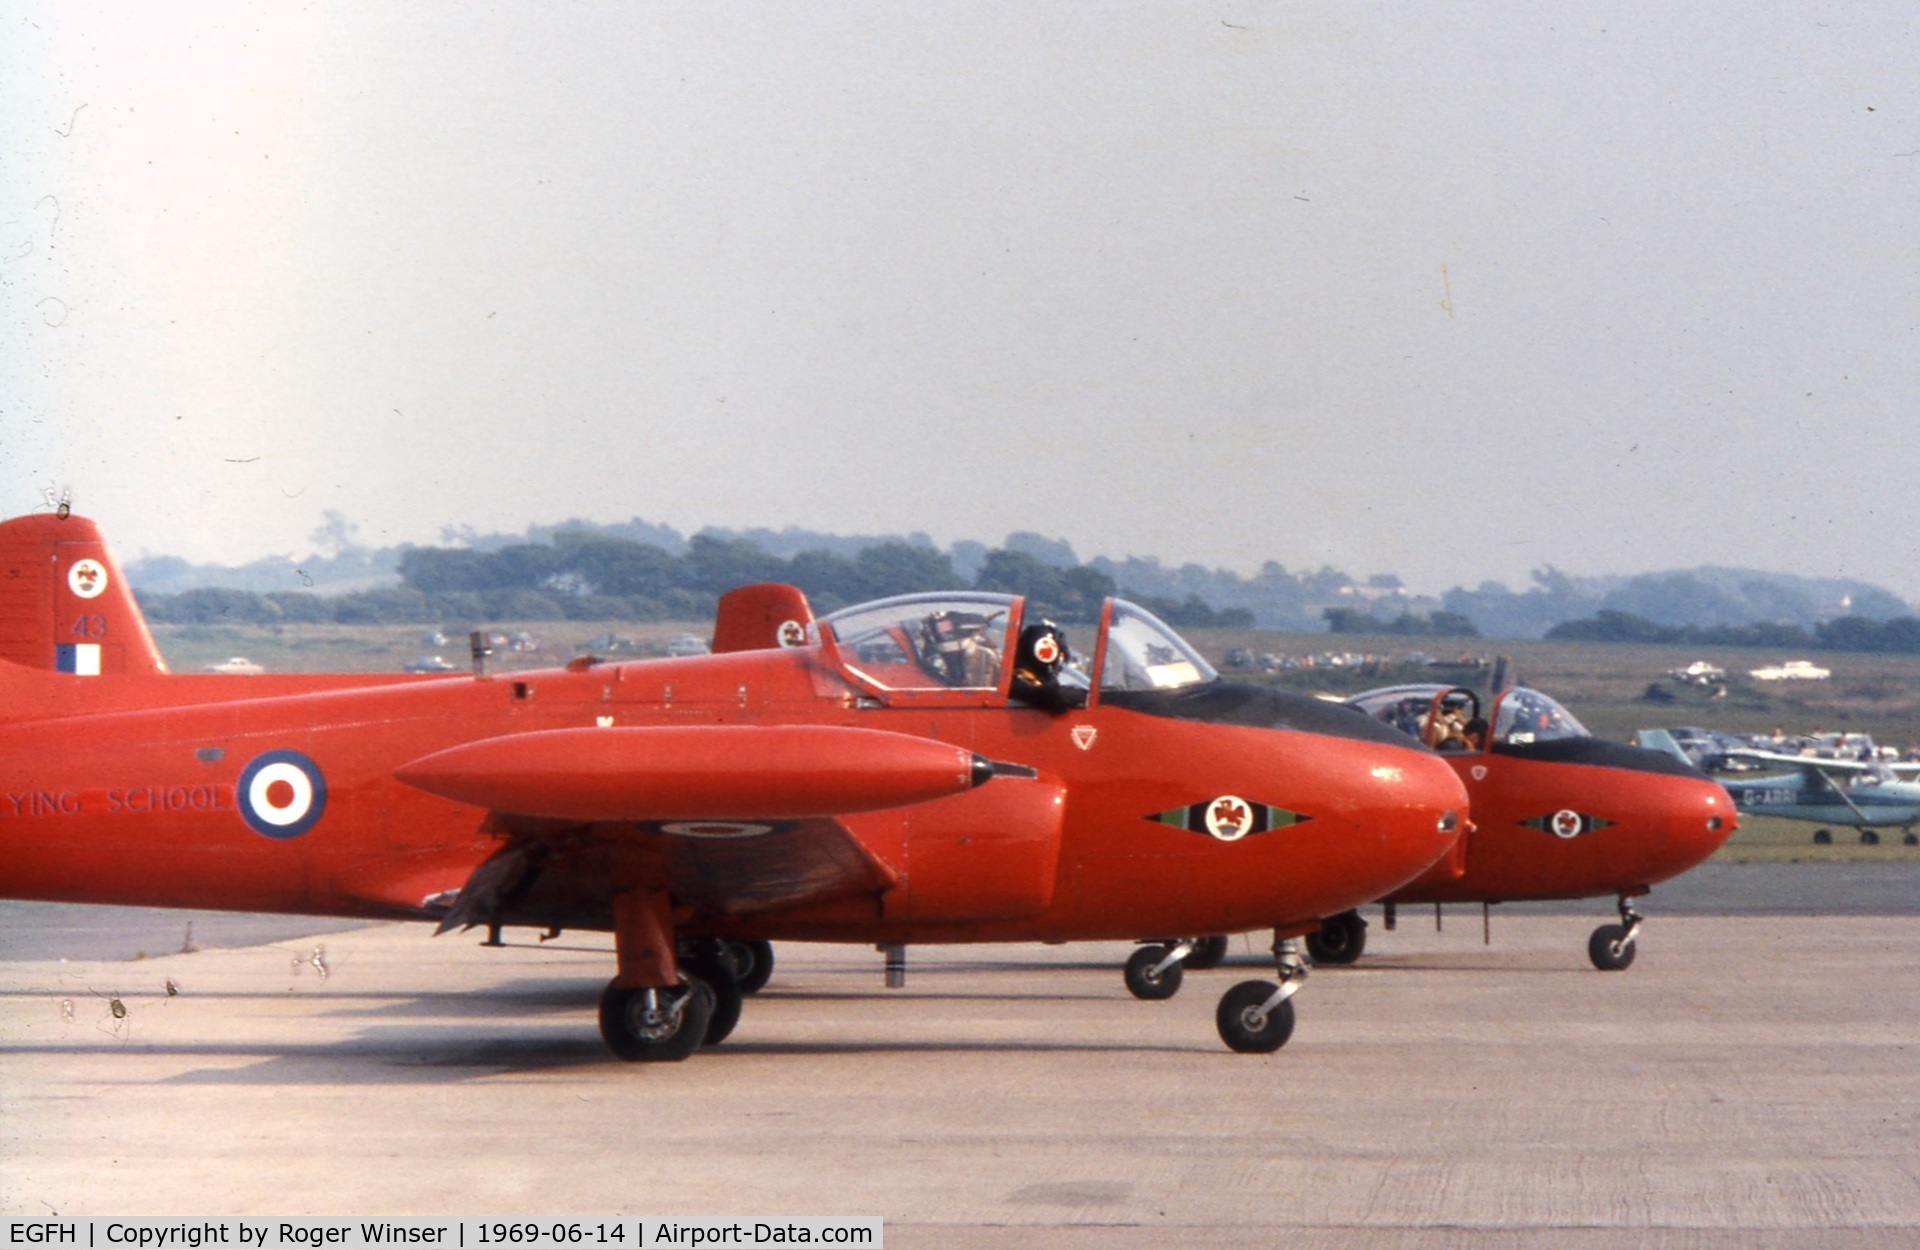 Swansea Airport, Swansea, Wales United Kingdom (EGFH) - RAF Jet Provost T4 aircraft of the Red Pelicans displayed at the Grand Air Show and Fete celebrating the 50th anniversary of the first non-stop trans-Atlantic flight.